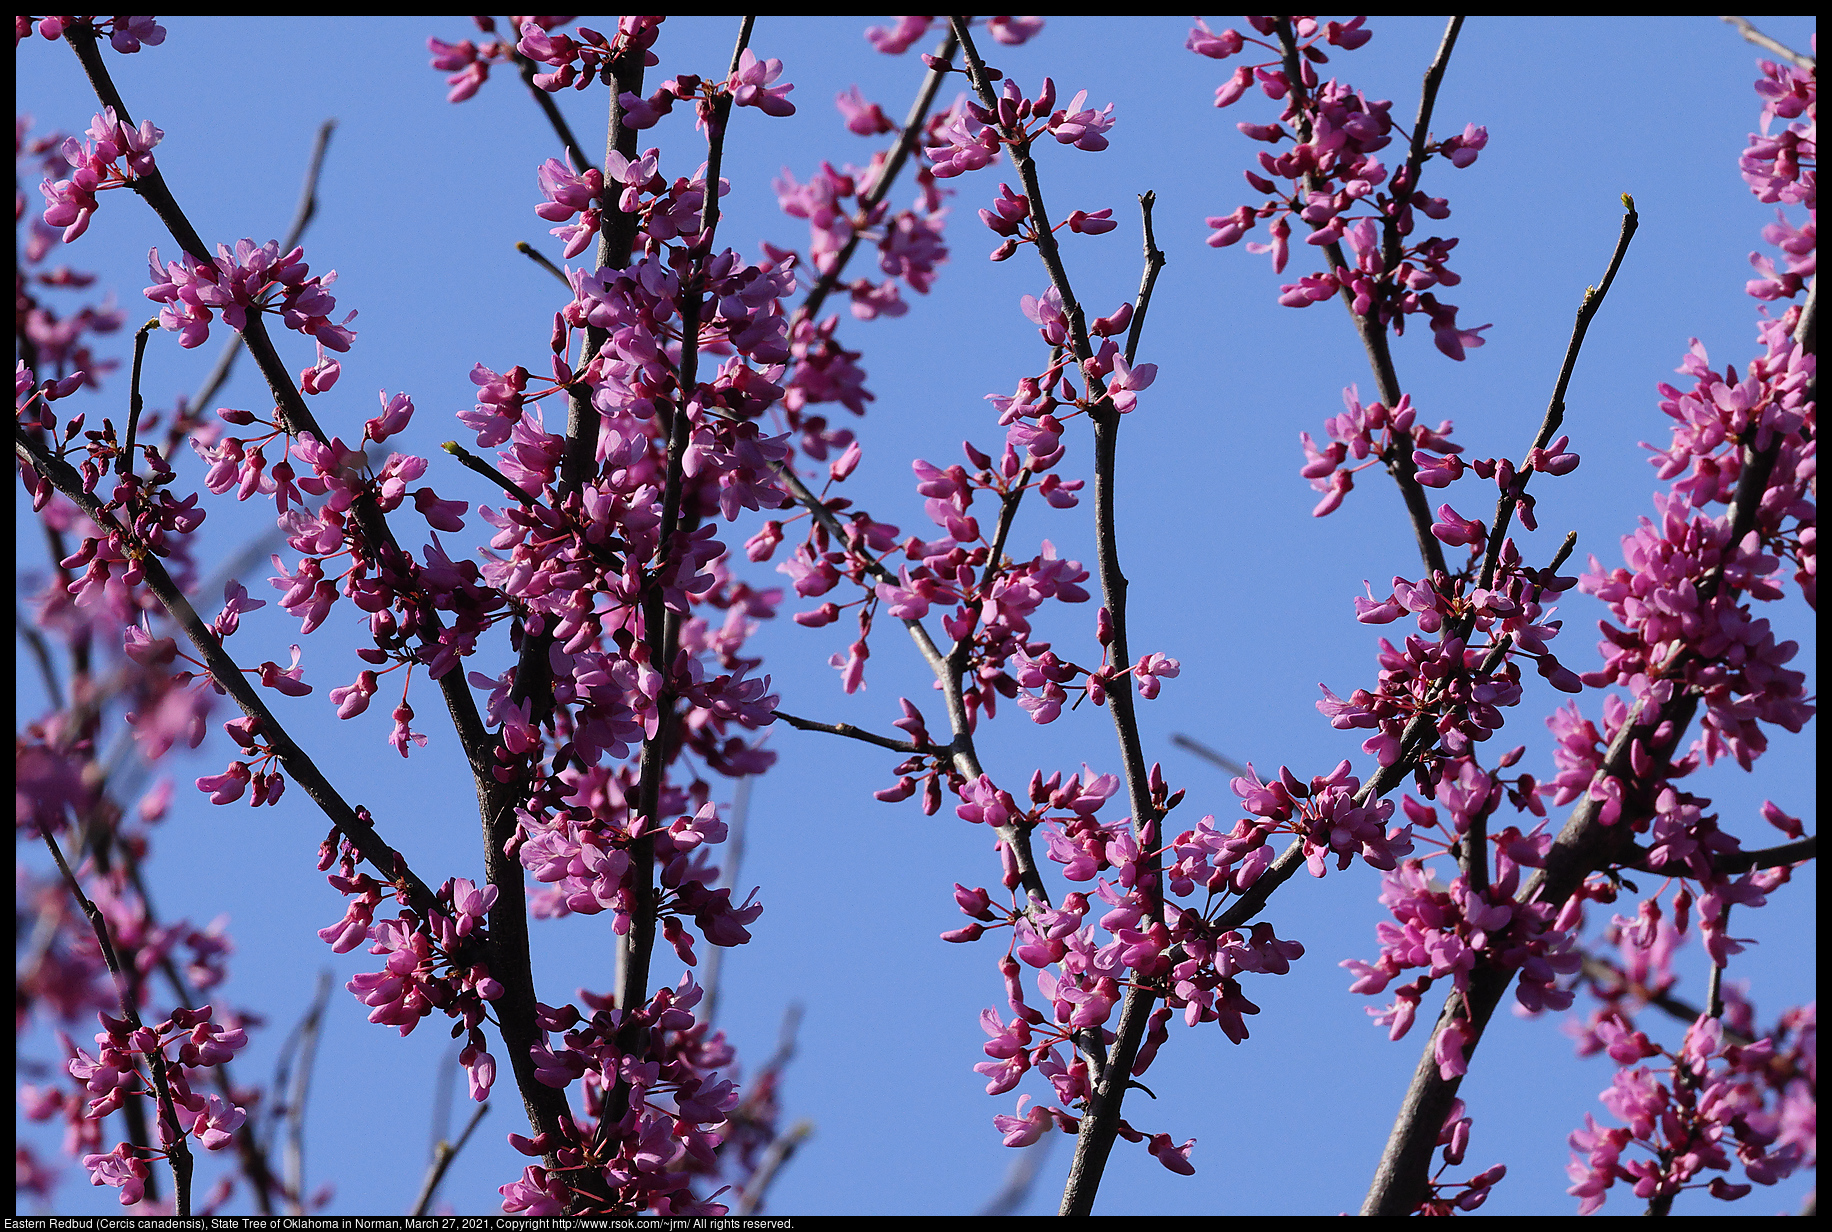 Eastern Redbud (Cercis canadensis), State Tree of Oklahoma in Norman, March 27, 2021